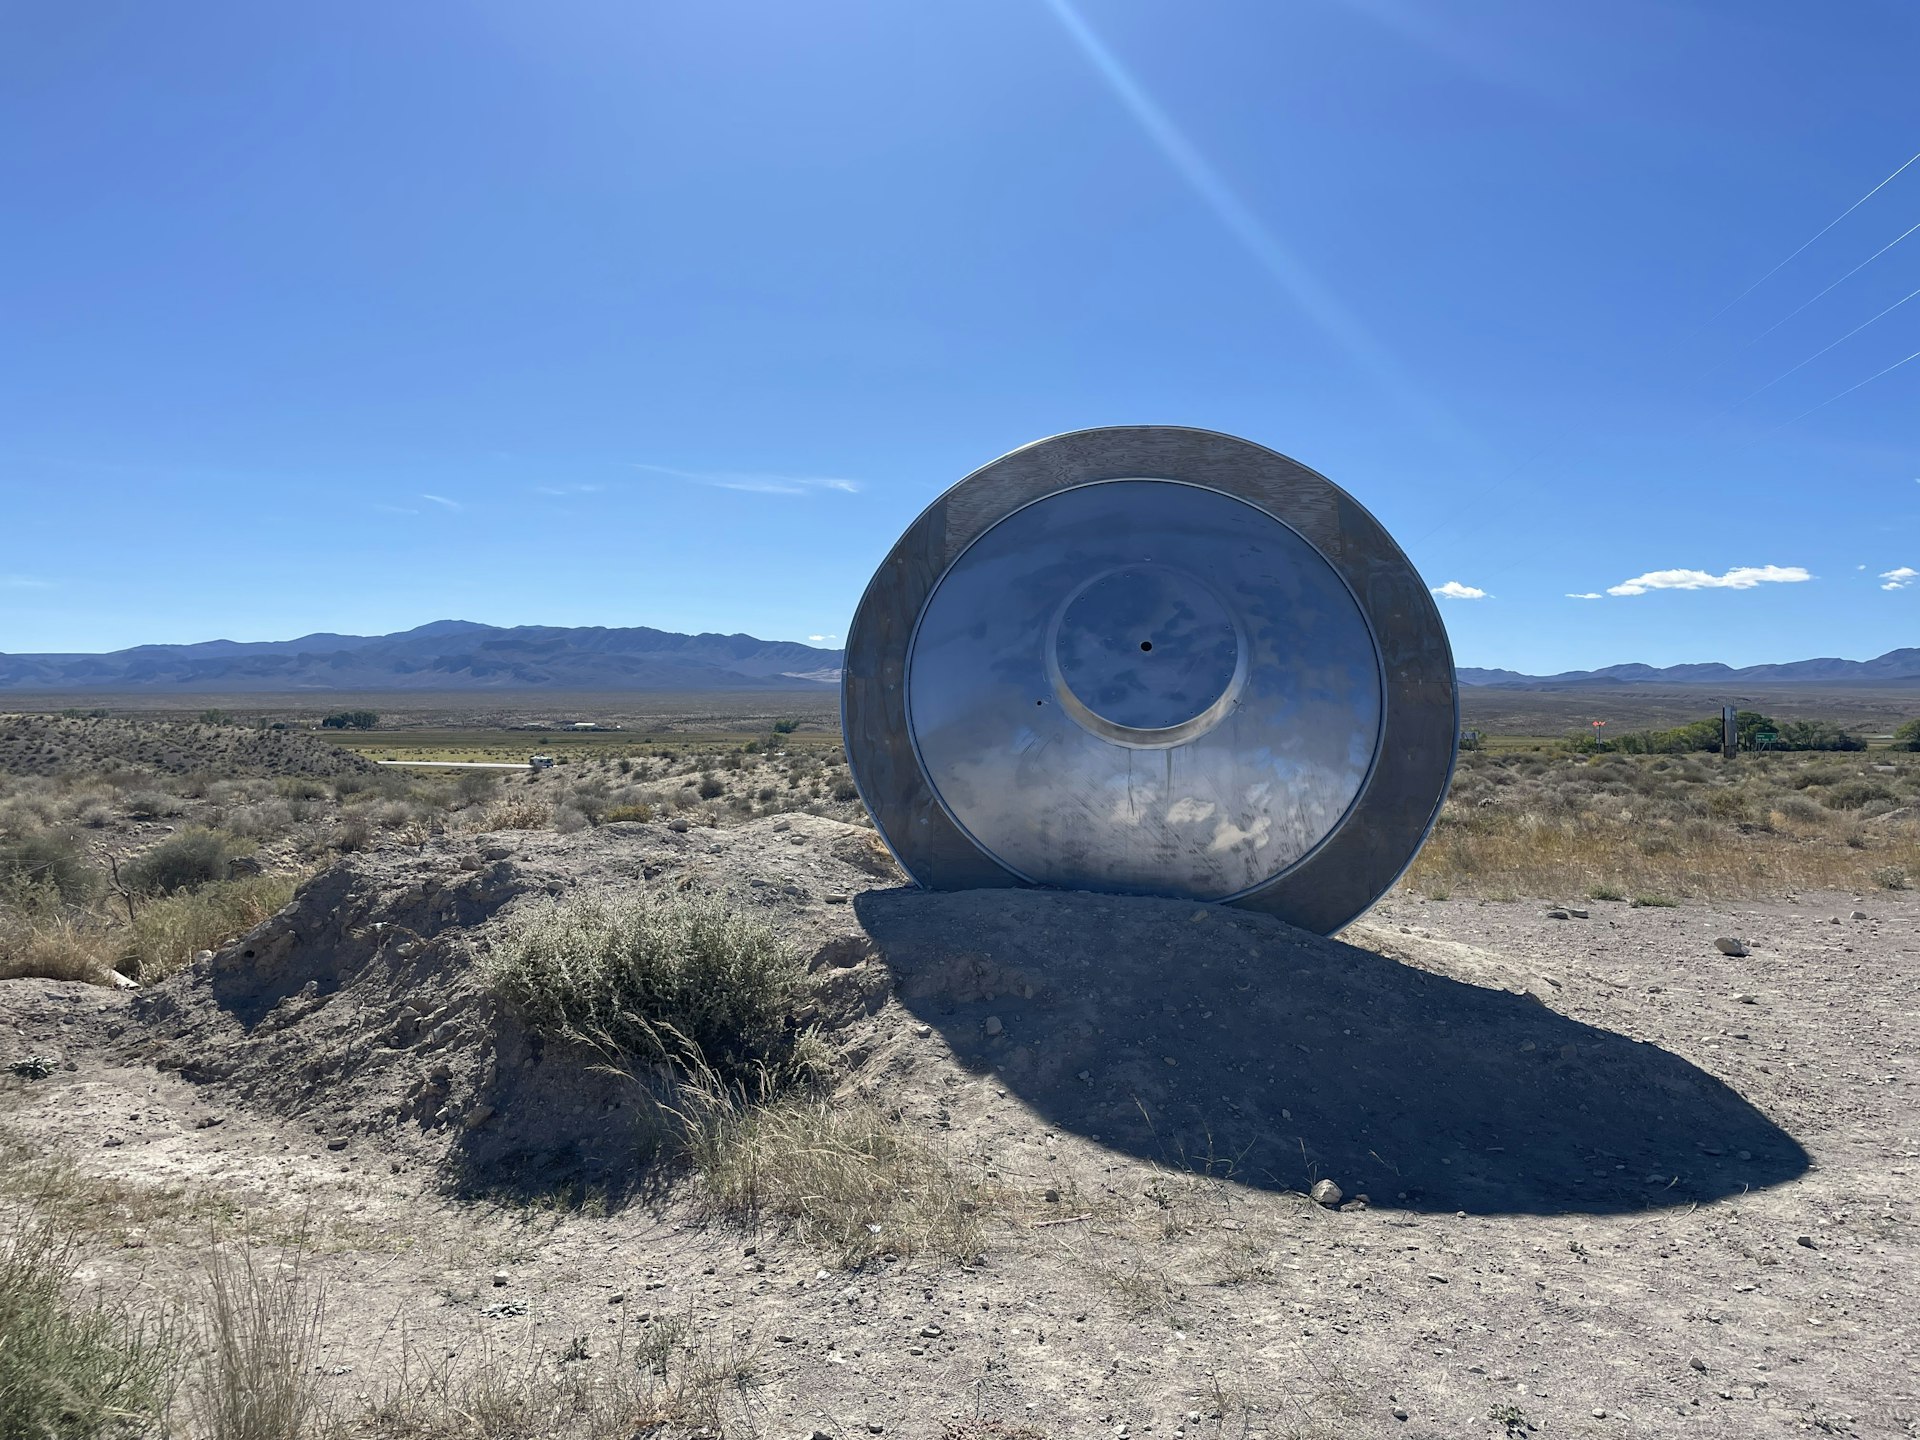 A large dish-shaped metal item - like a spaceship - stands in a desert area 